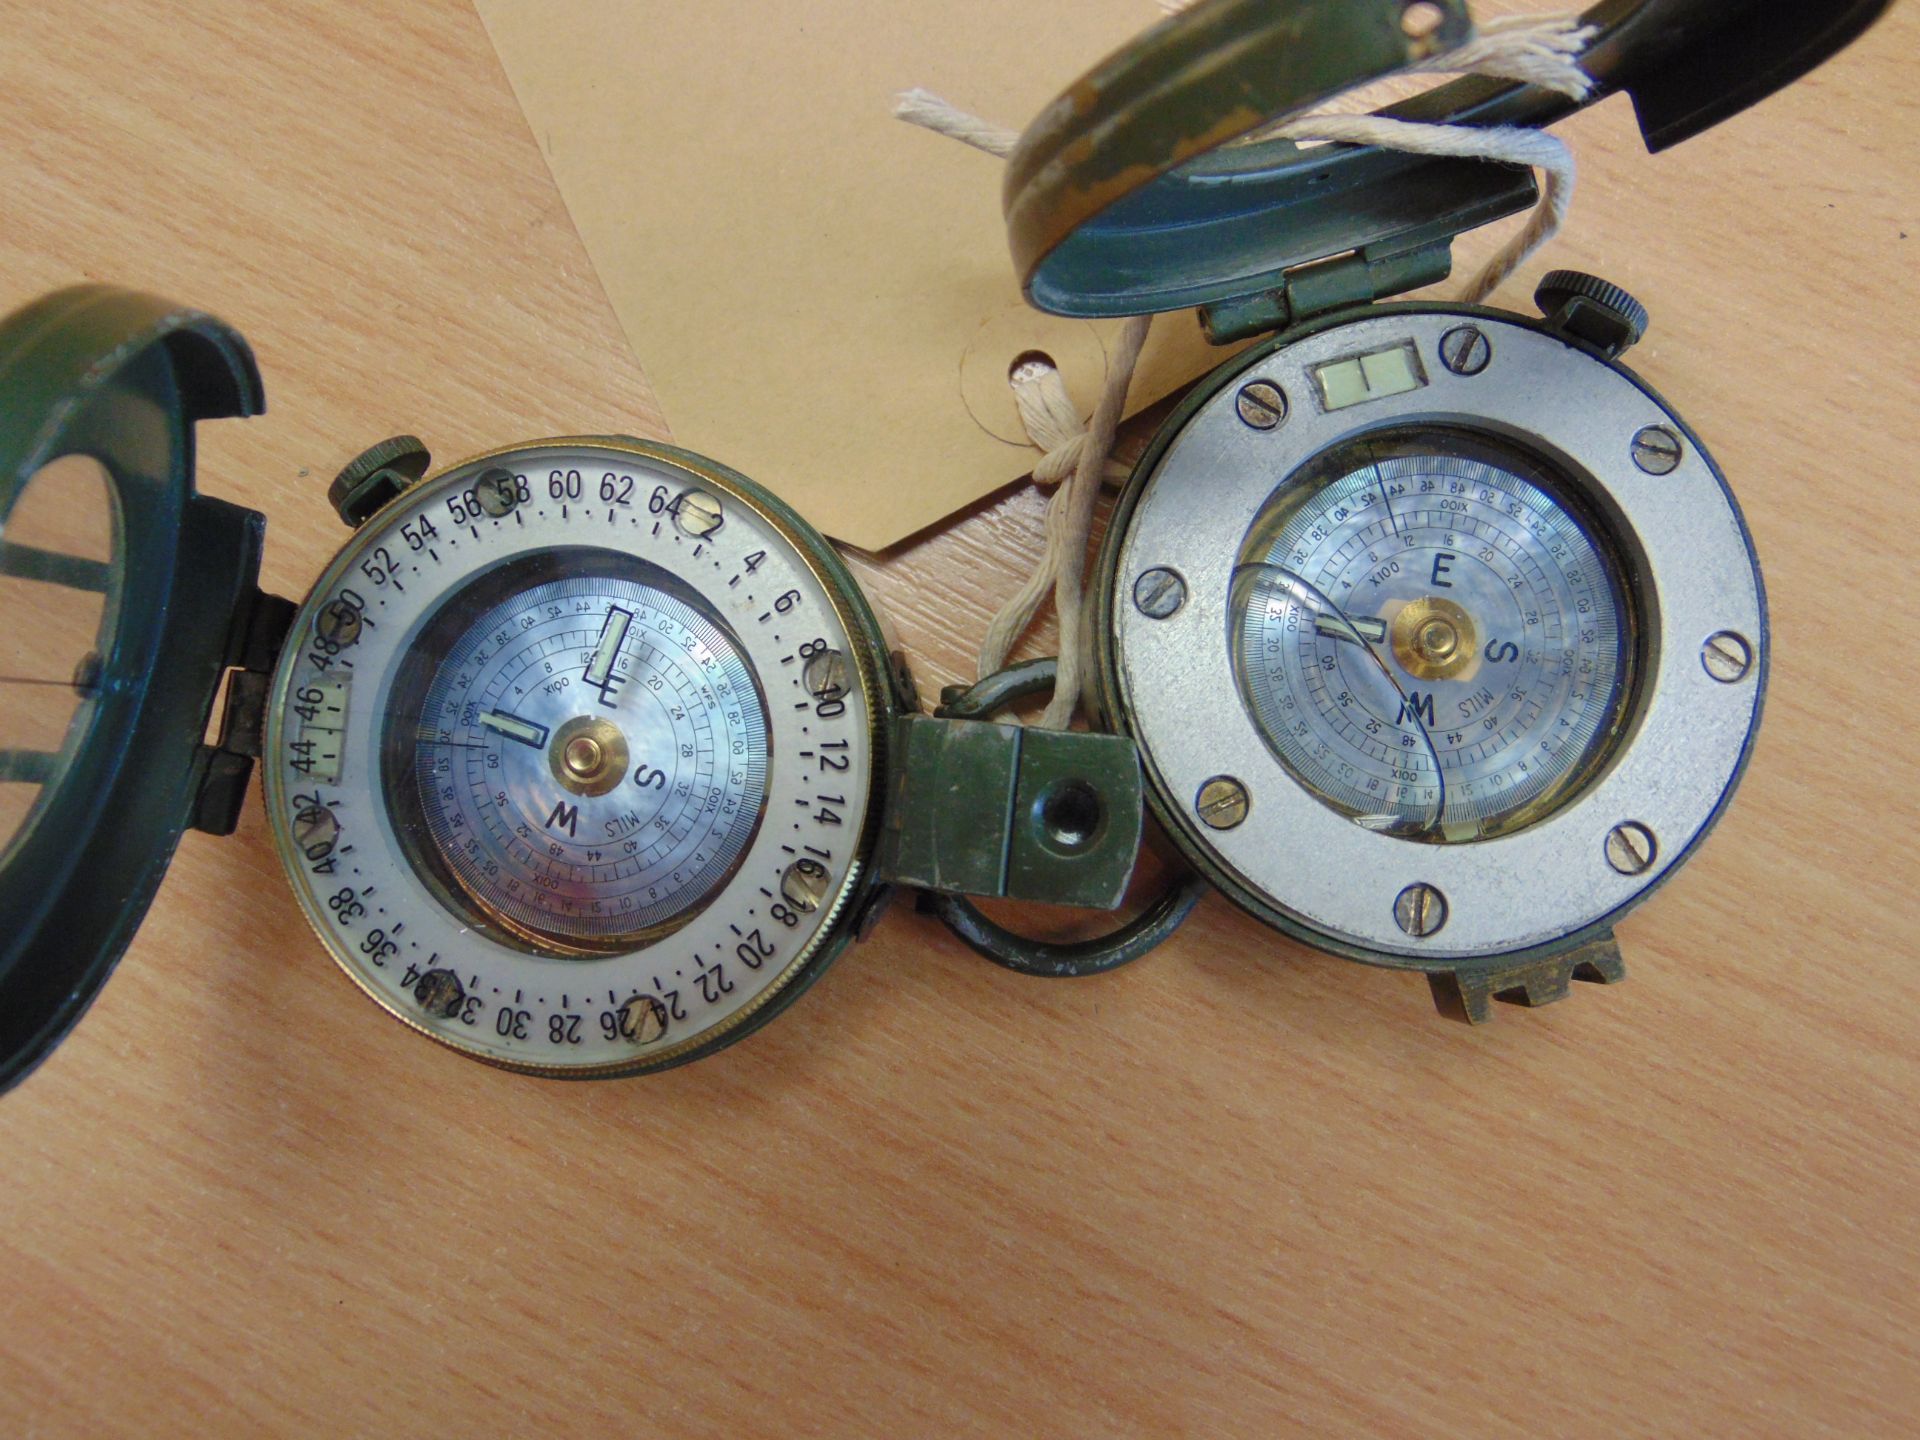 2 STANLEY LONDON PRISMATIC COMPASS BRITISH ARMY ISSUE NATO MARKS IN MILS - Image 3 of 6